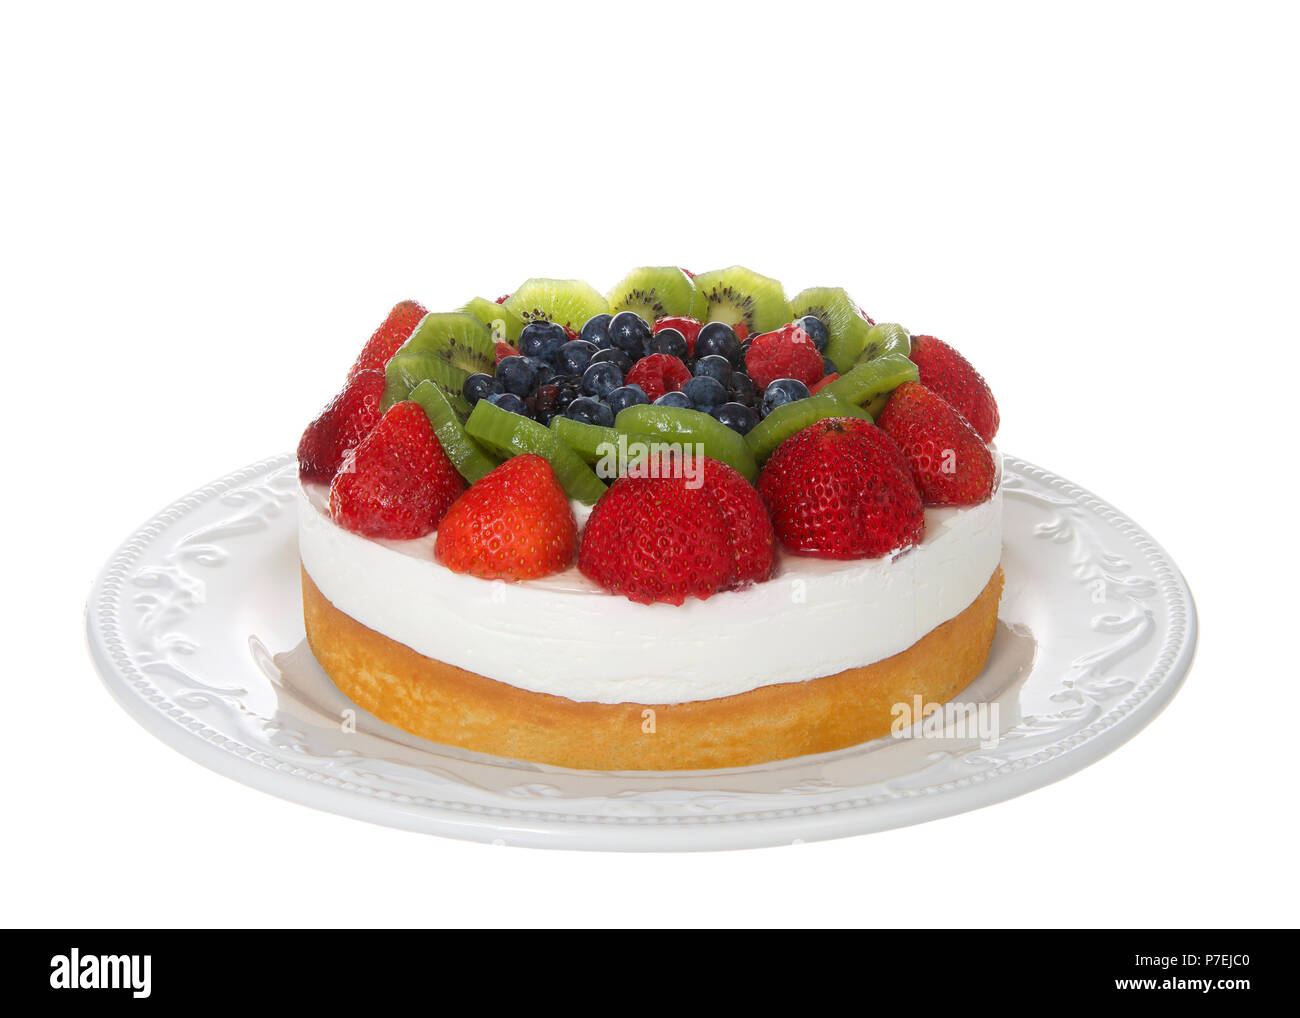 Fresh fruit on a shortbread cake with whipped cream topping on off white porcelain plate isolated on white. Focus stacked for greater depth of field. Stock Photo